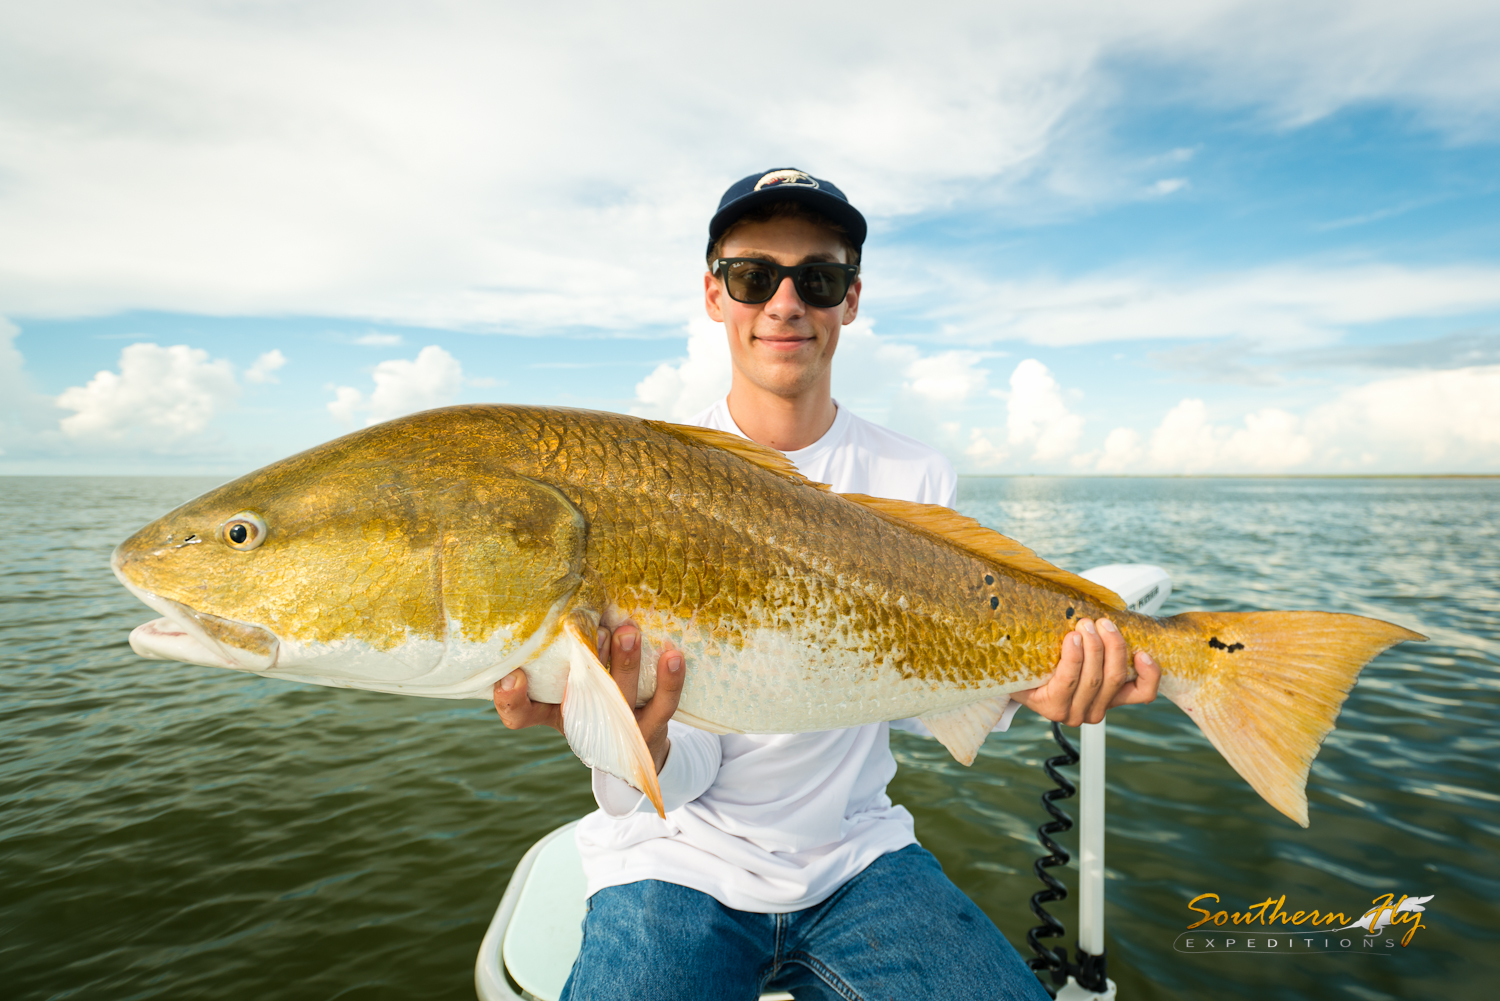 Fly Fishing New Orleans with Southern Fly Expeditions - The best fly fishing guide in Louisiana 